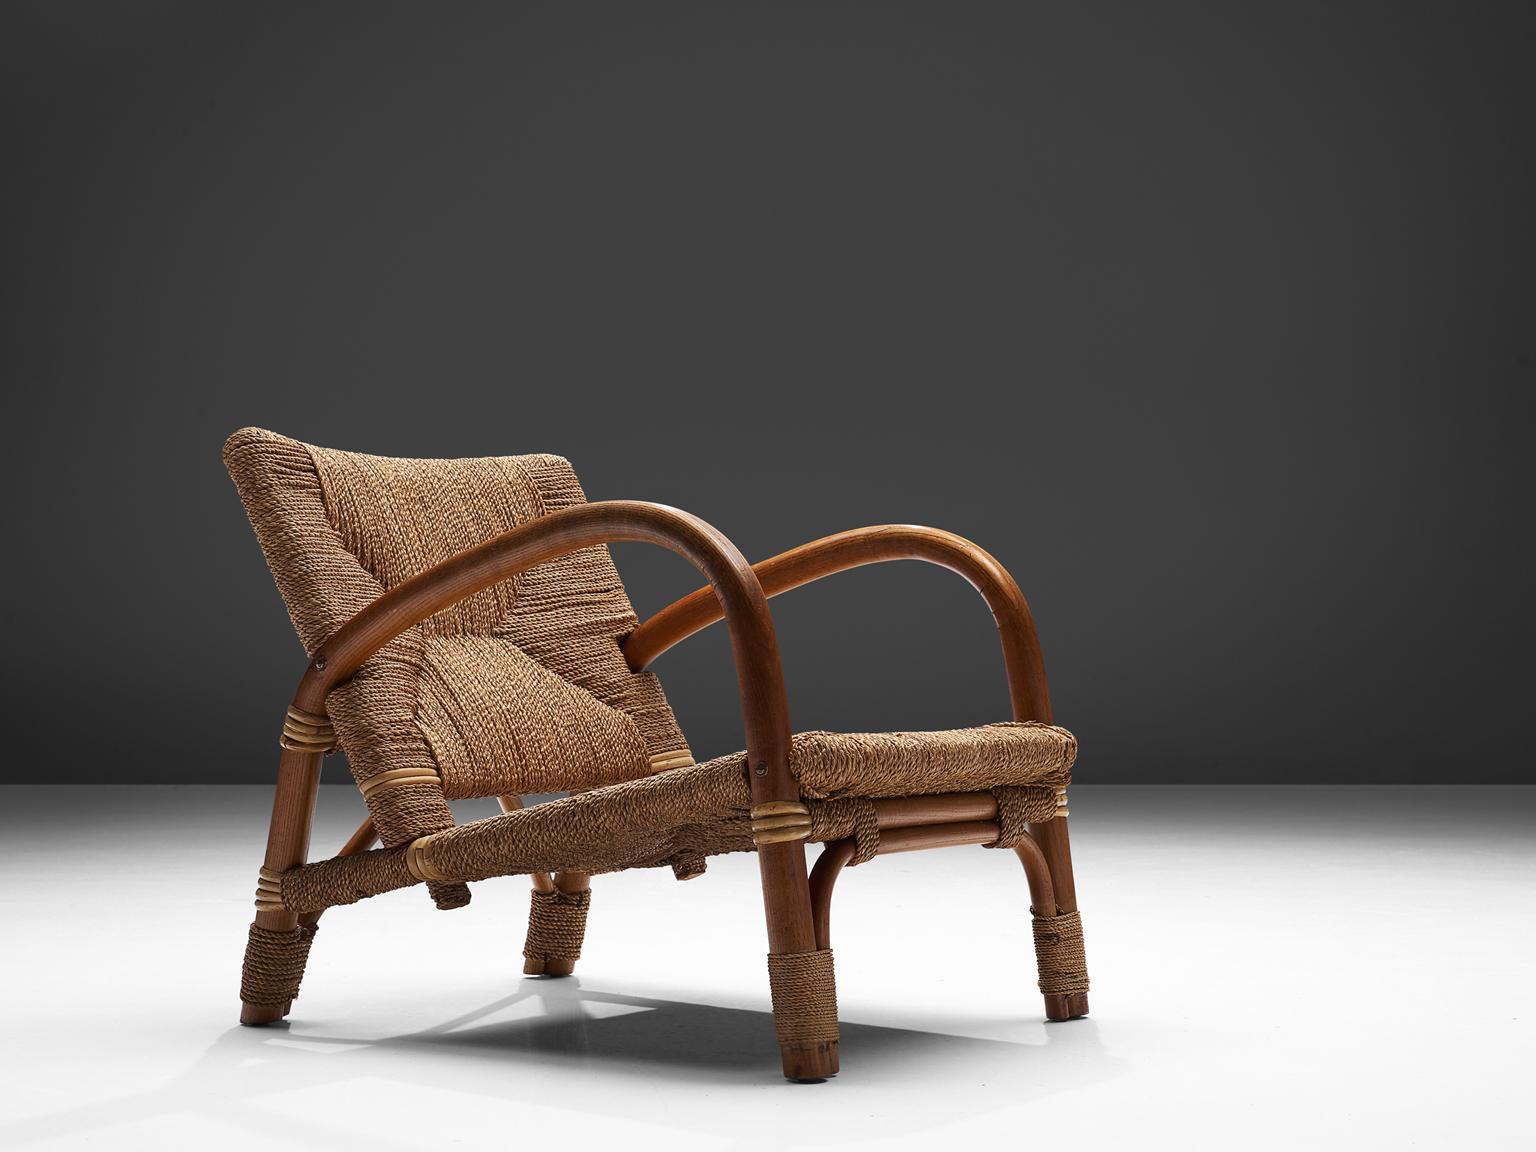 Wicker armchair, cane and beechwood, Netherlands, 1960s.

This well designed lounge chairs has an open character. The warm expression of the two materials combined work well. The woven cane upholstery shows beautiful details. The cane is used both